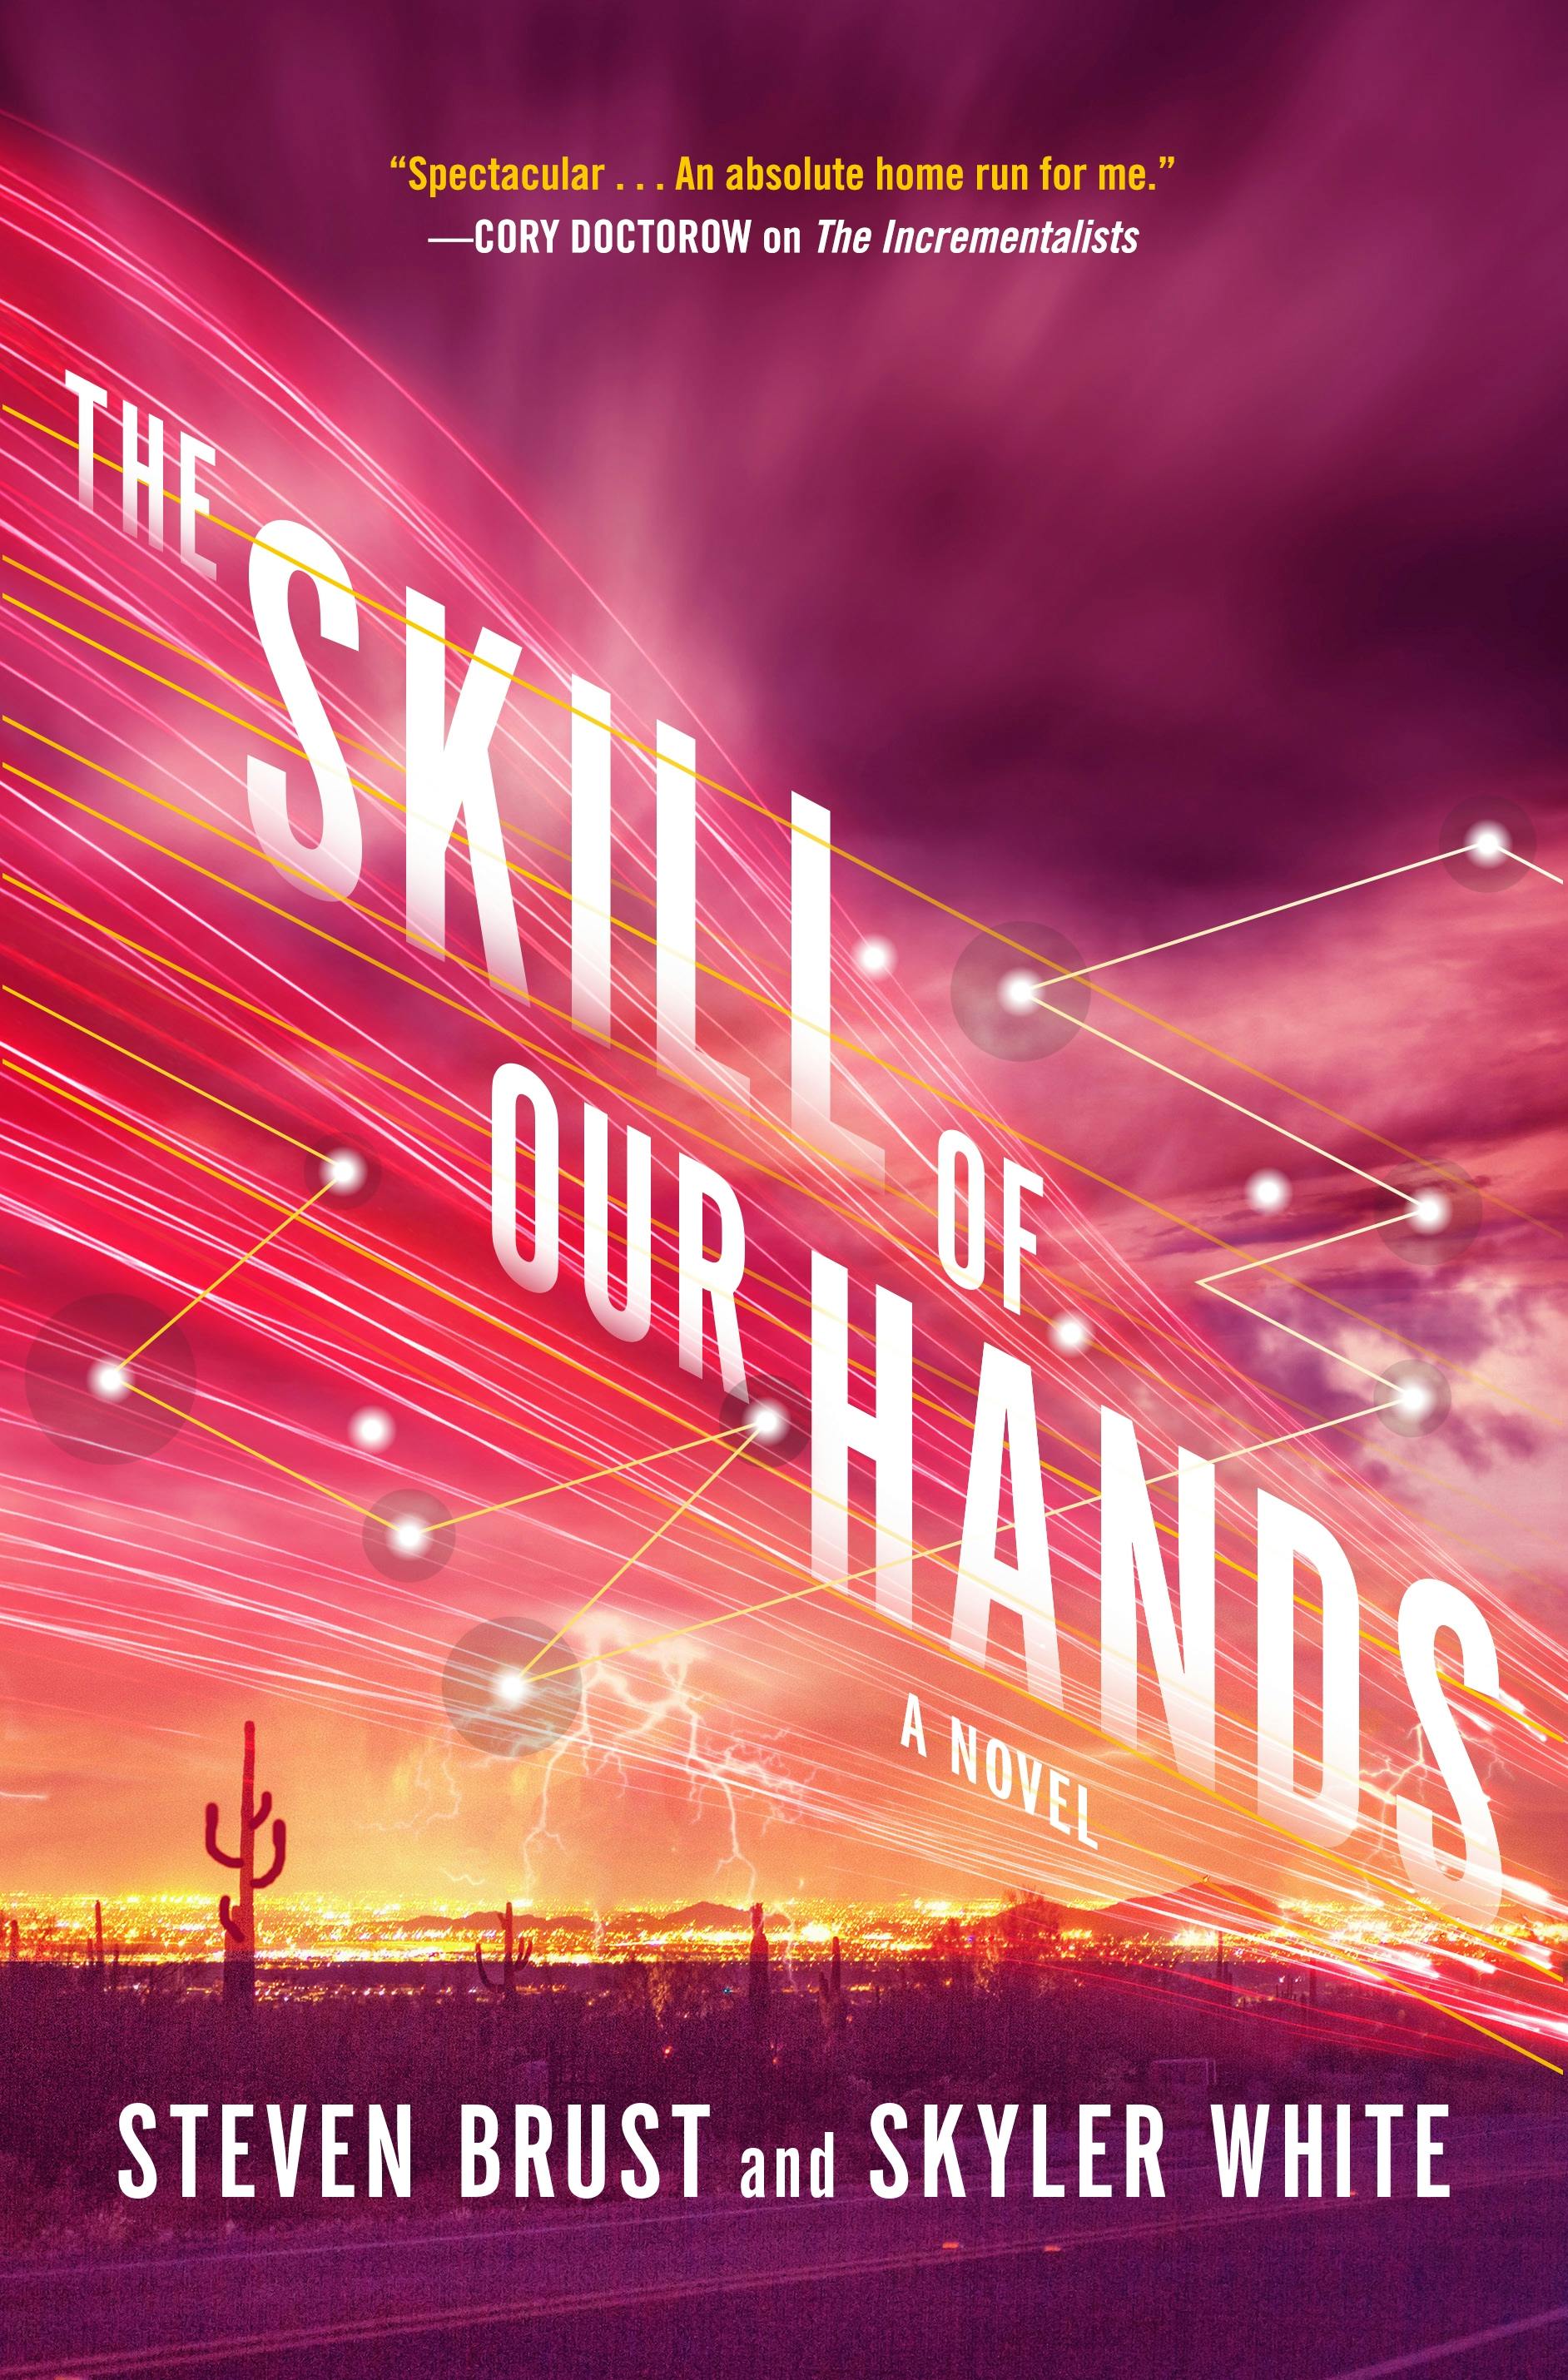 Image of The Skill of Our Hands